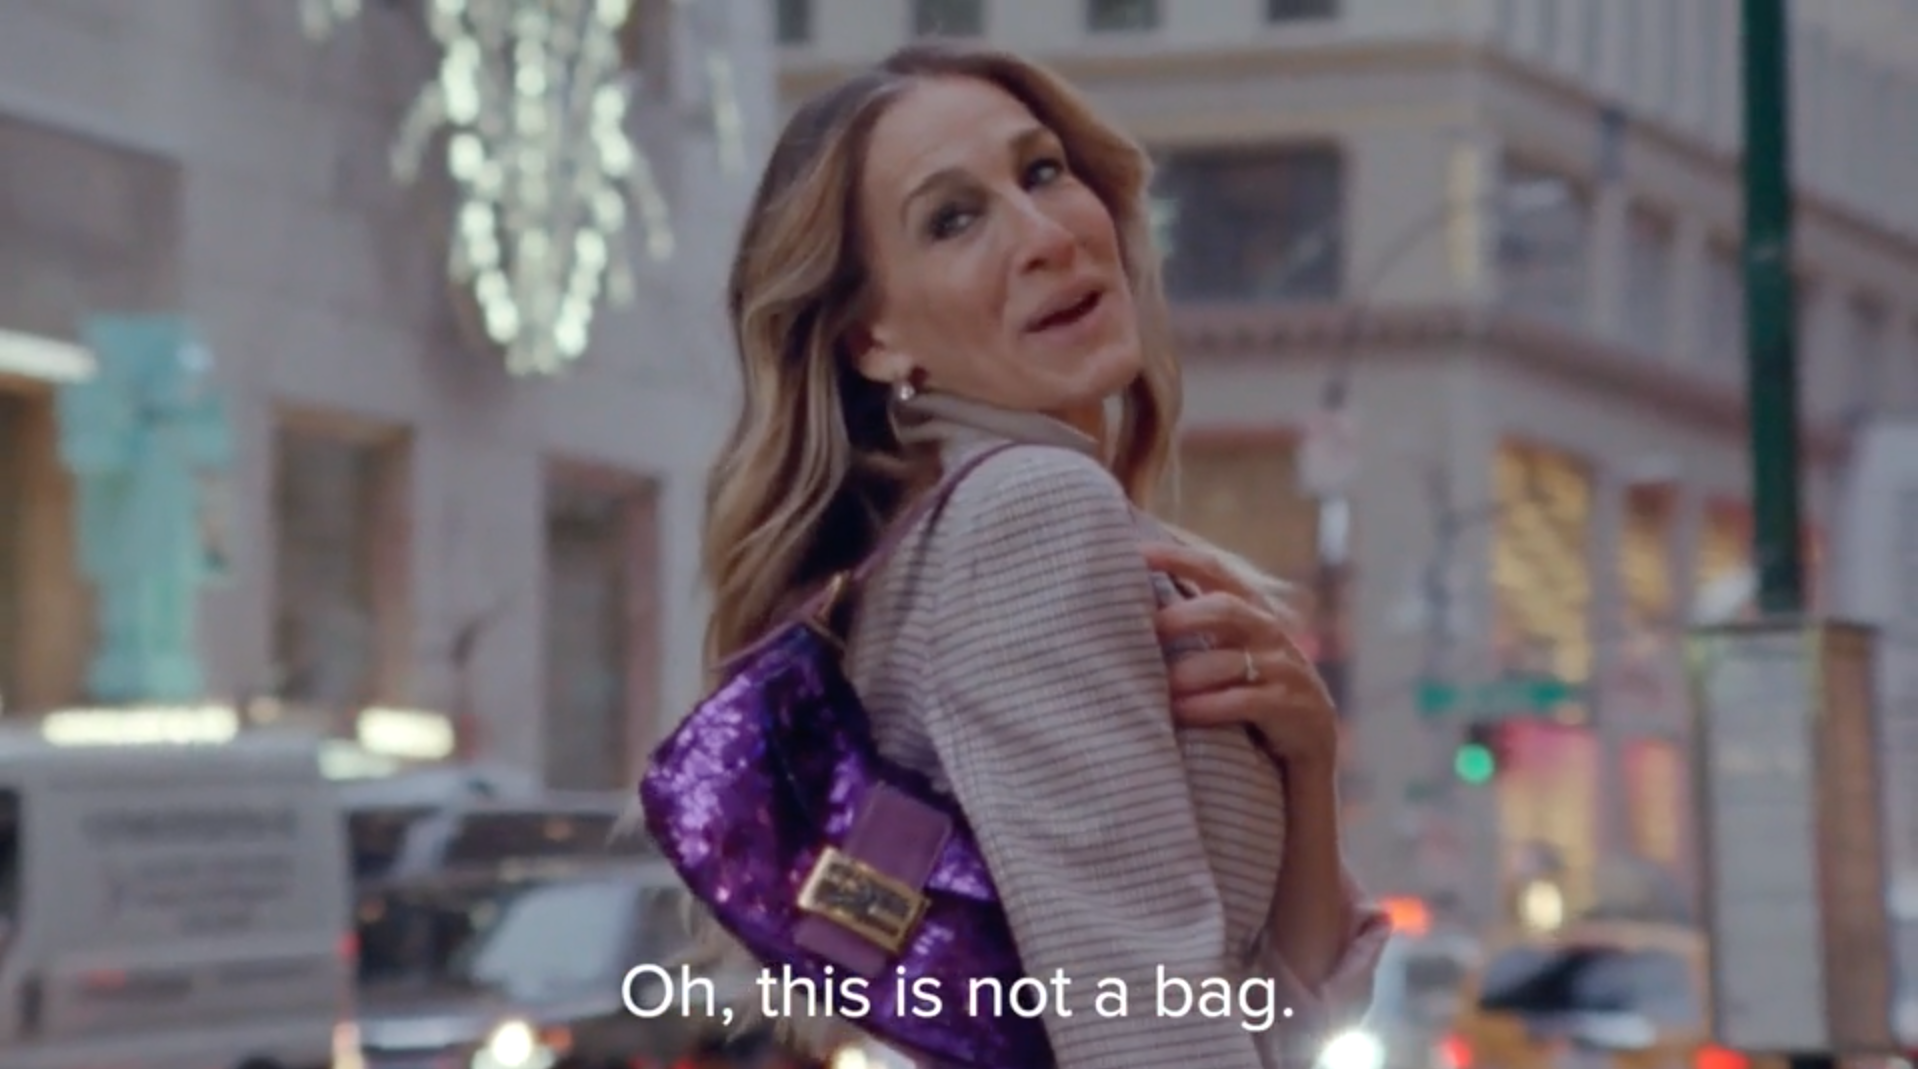 The iconic baguette is with help of Carrie Bradshaw